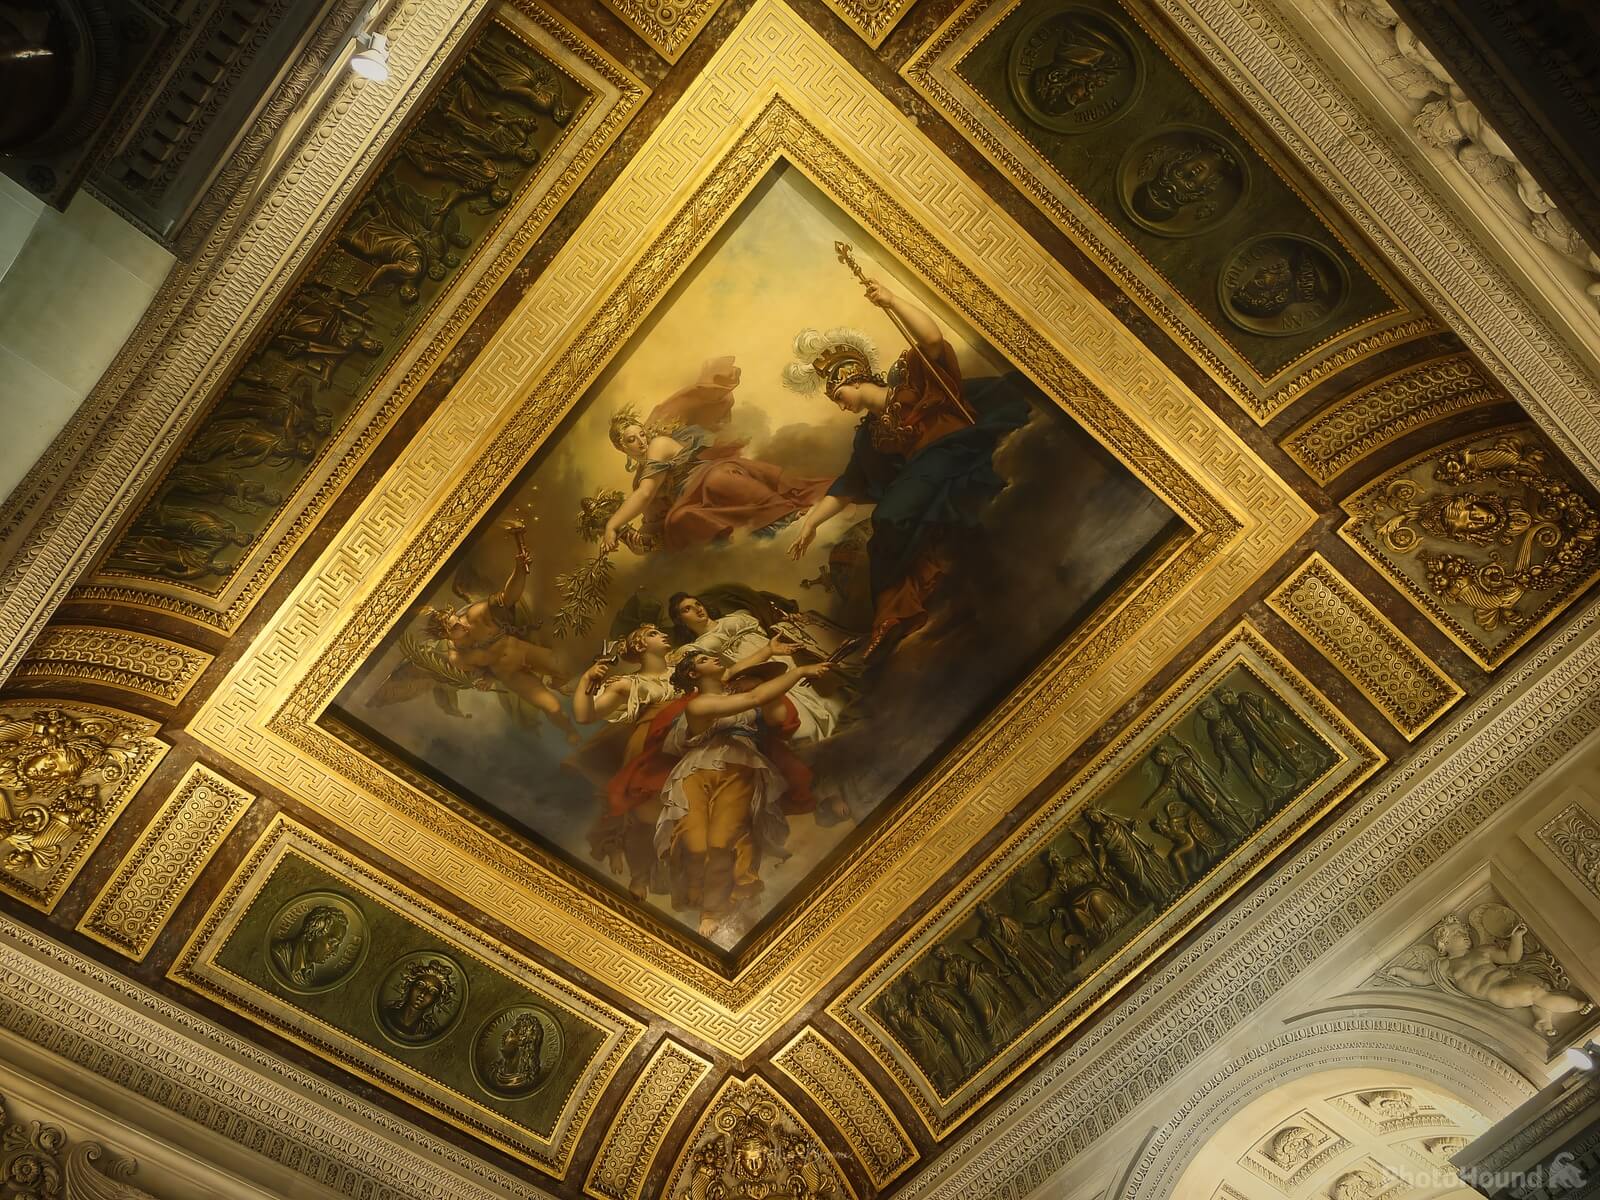 Image of The Louvre Museum by Mathew Browne